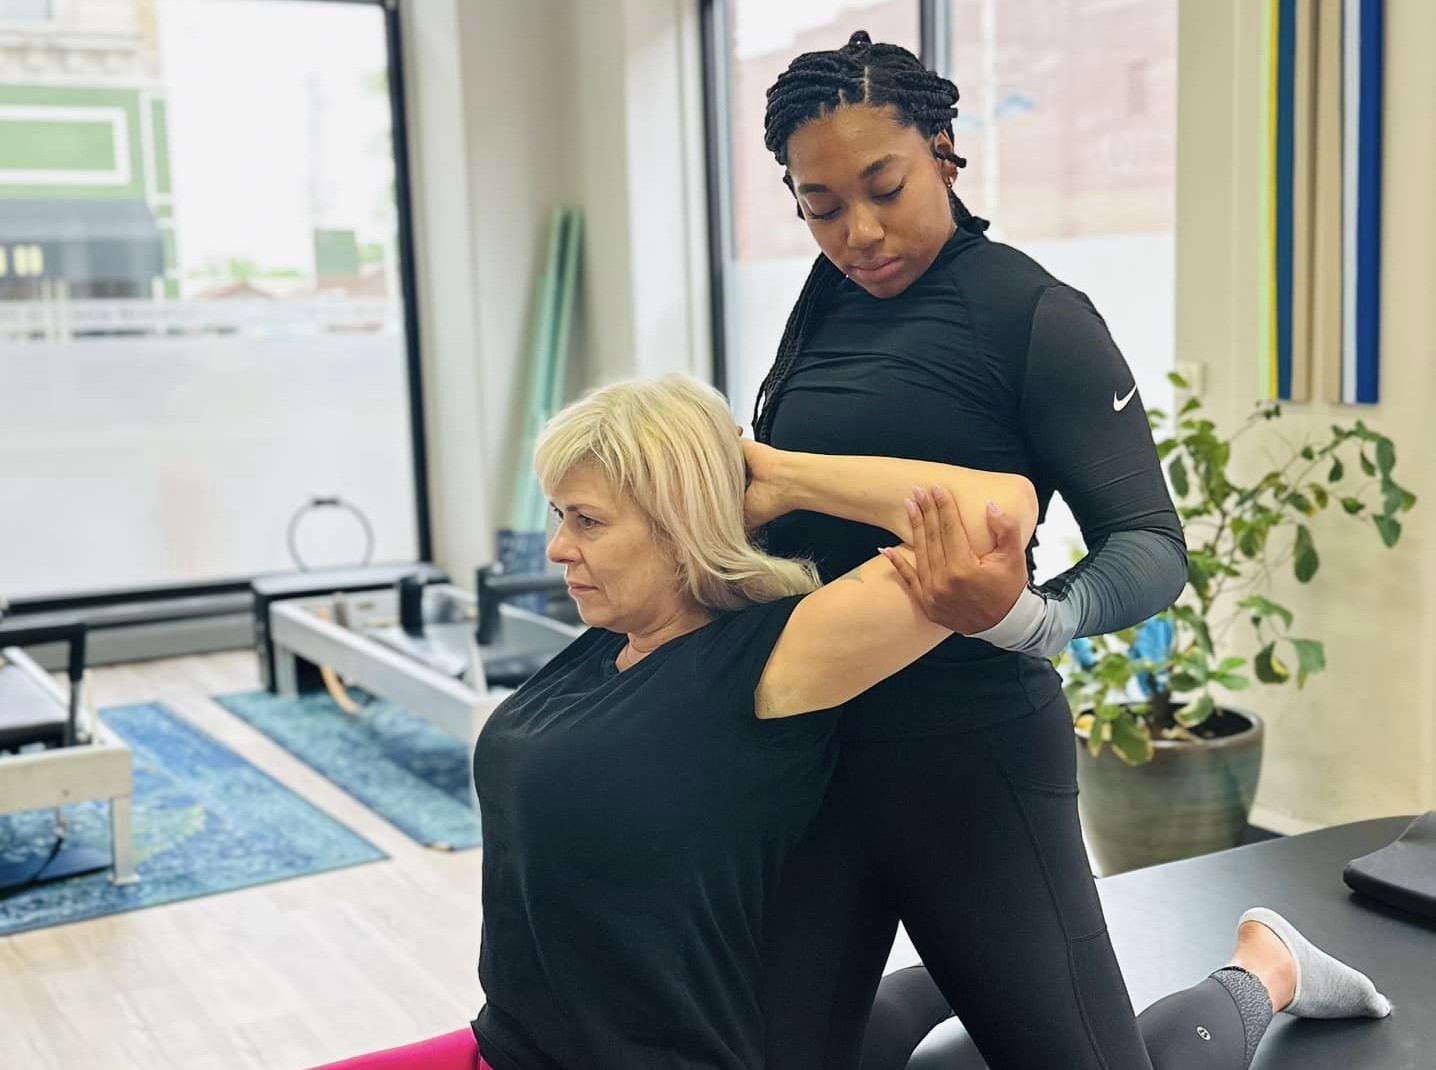 A white woman is sitting on a bench, hands behind her head, with elbows out. A Black woman therapist is positioned behind her, stretching her arms.